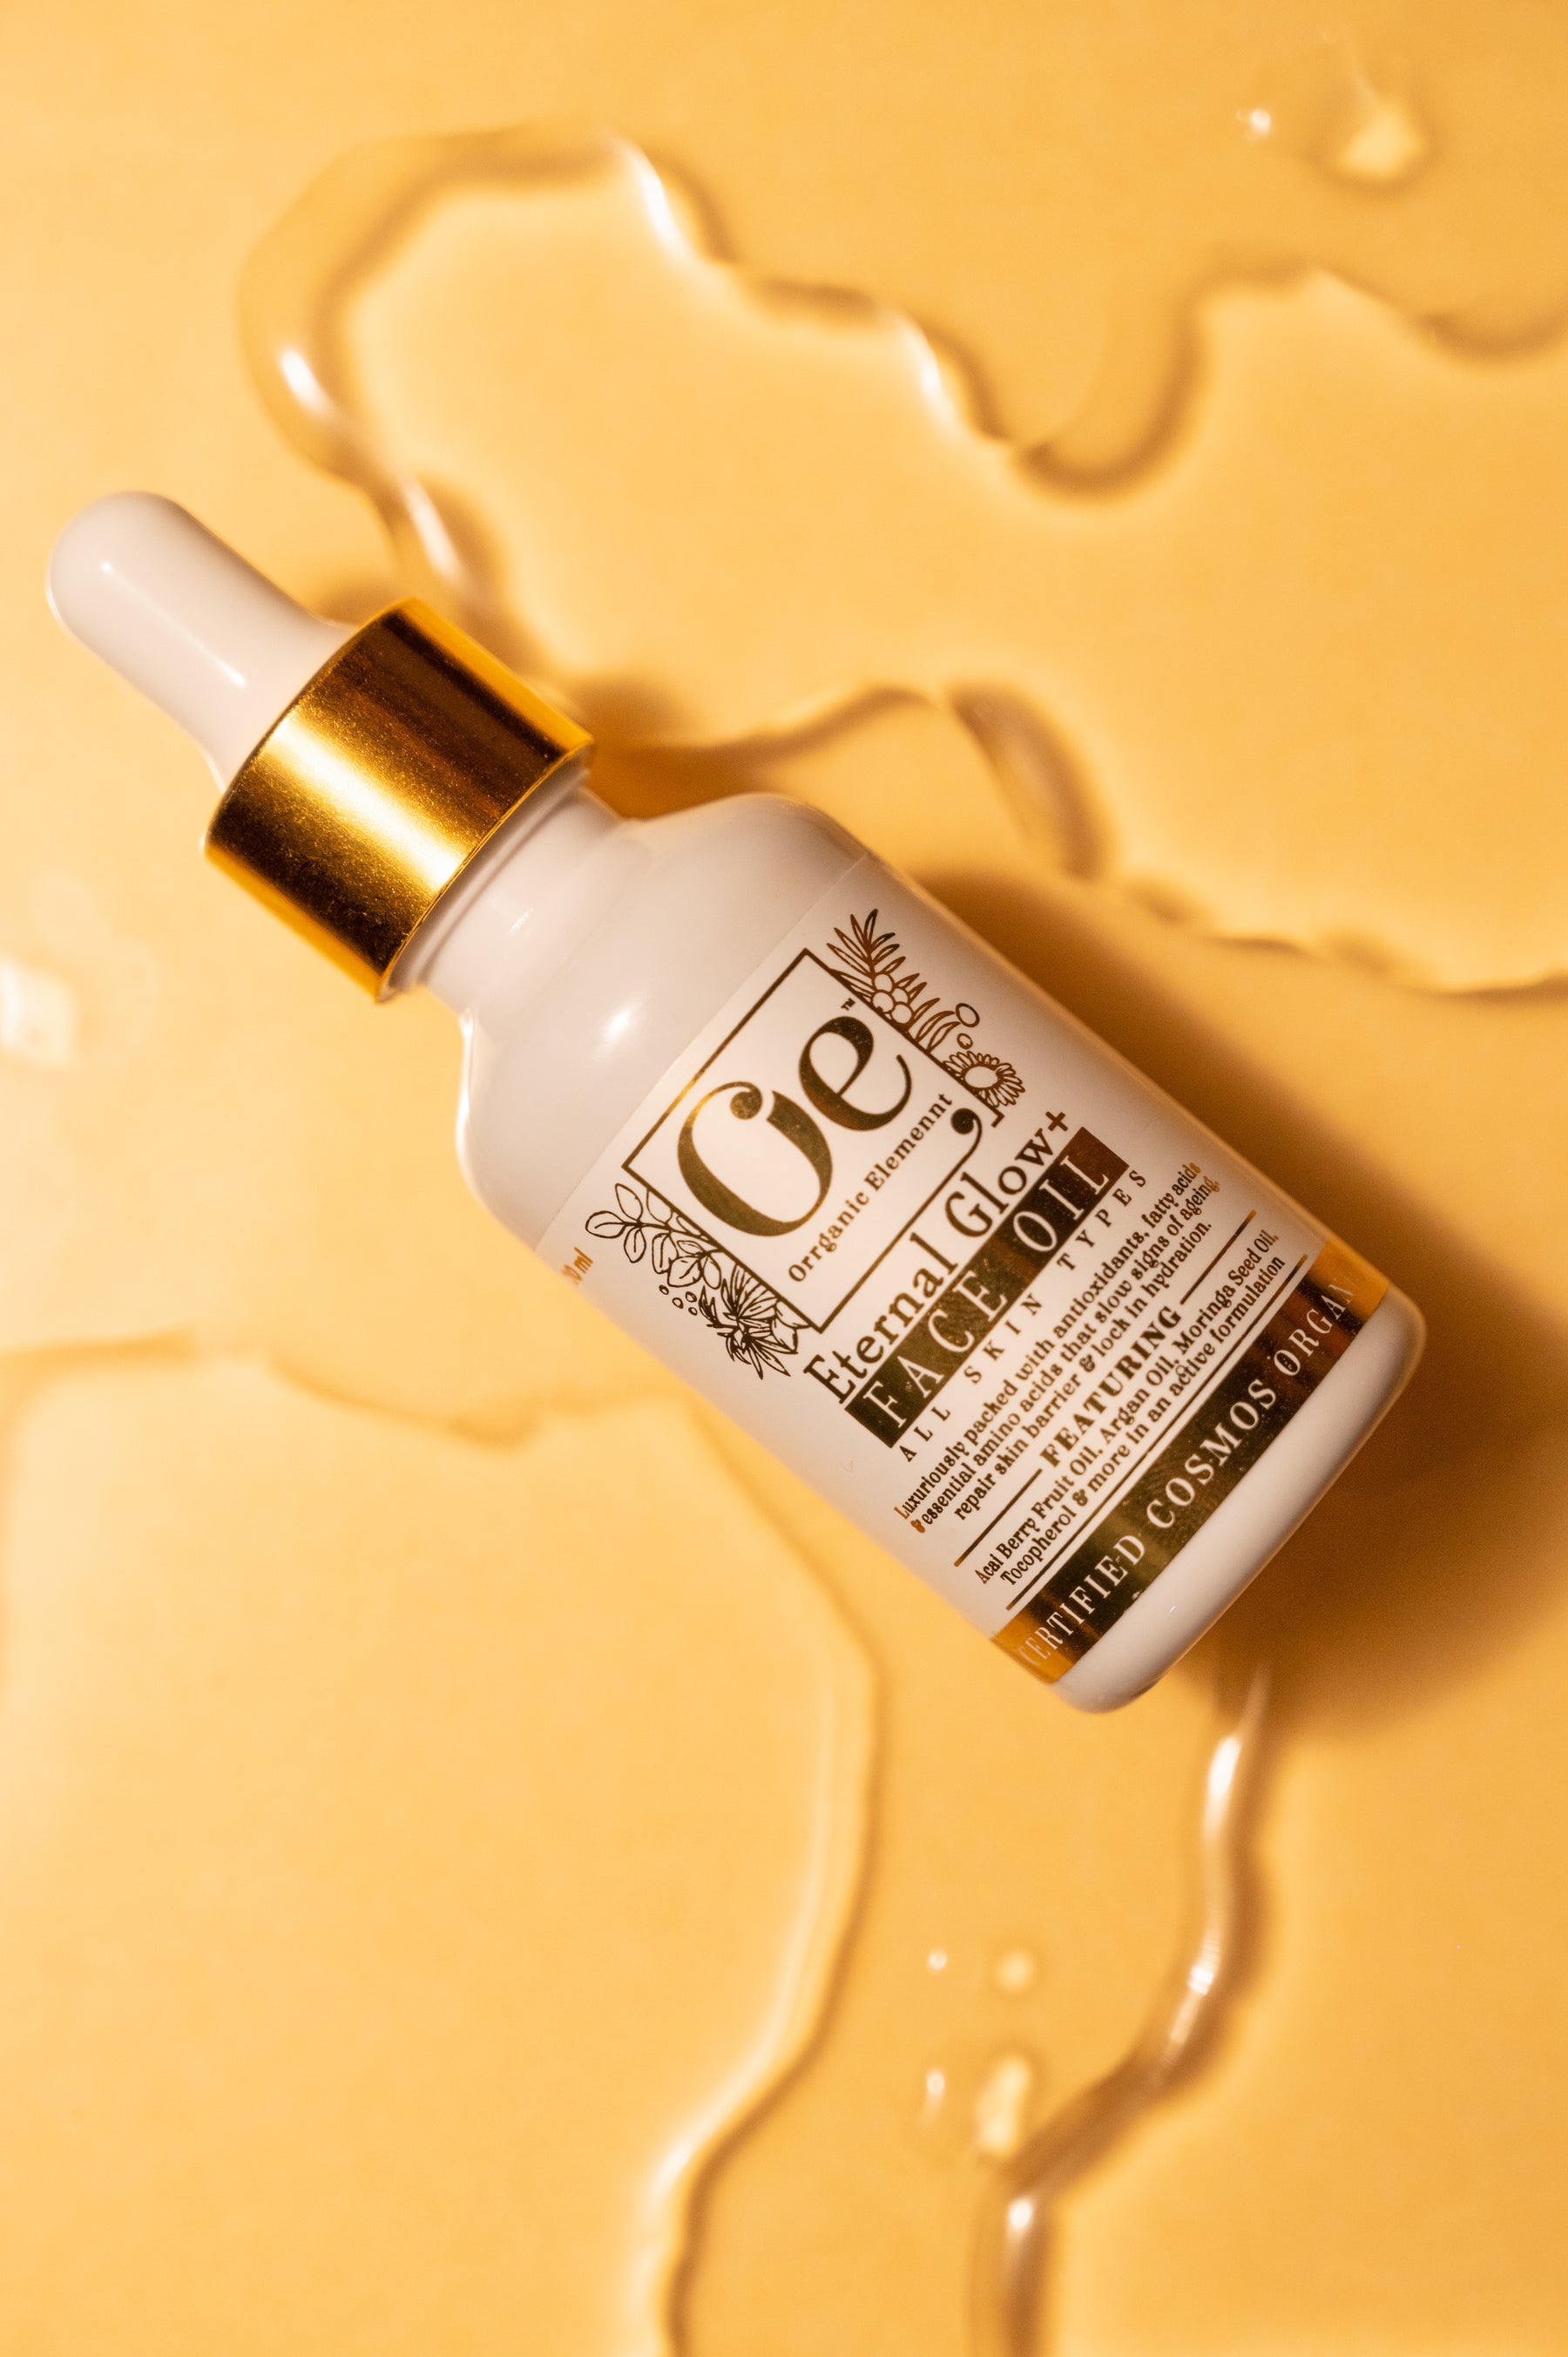 Try out our best selling product - the Eternal Glow Face oil - for your winter skin care routine